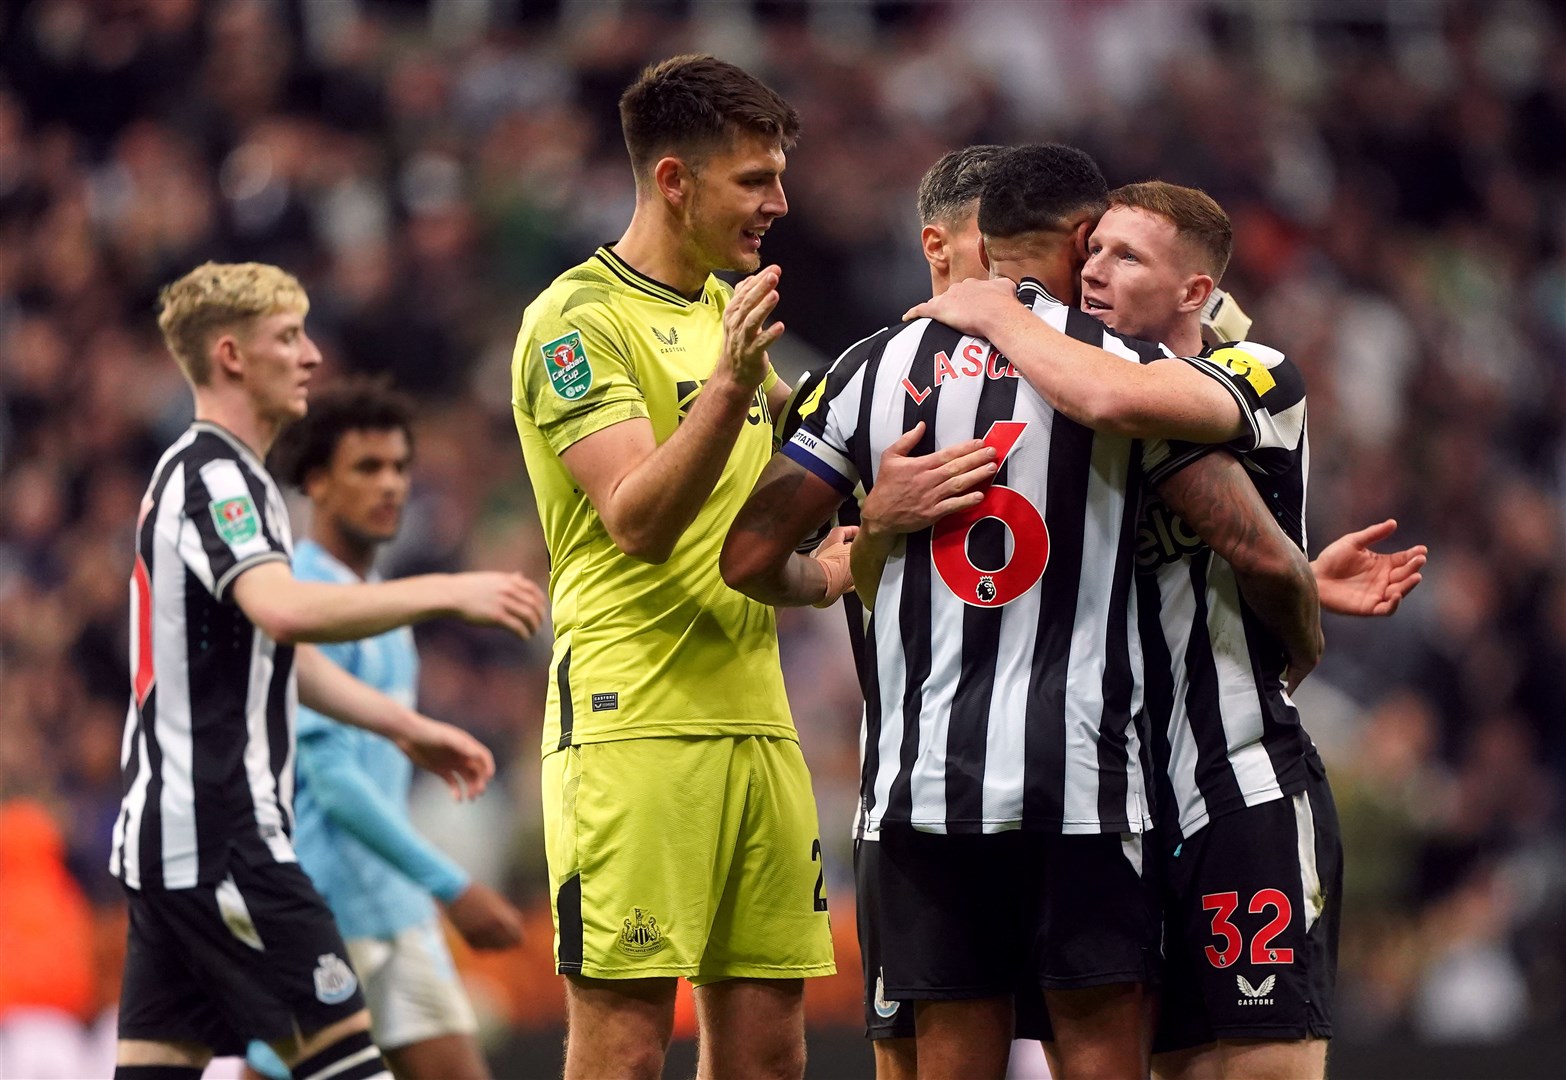 Newcastle United beat Manchester City on the night Blake made his comments (Owen Humphreys/PA)